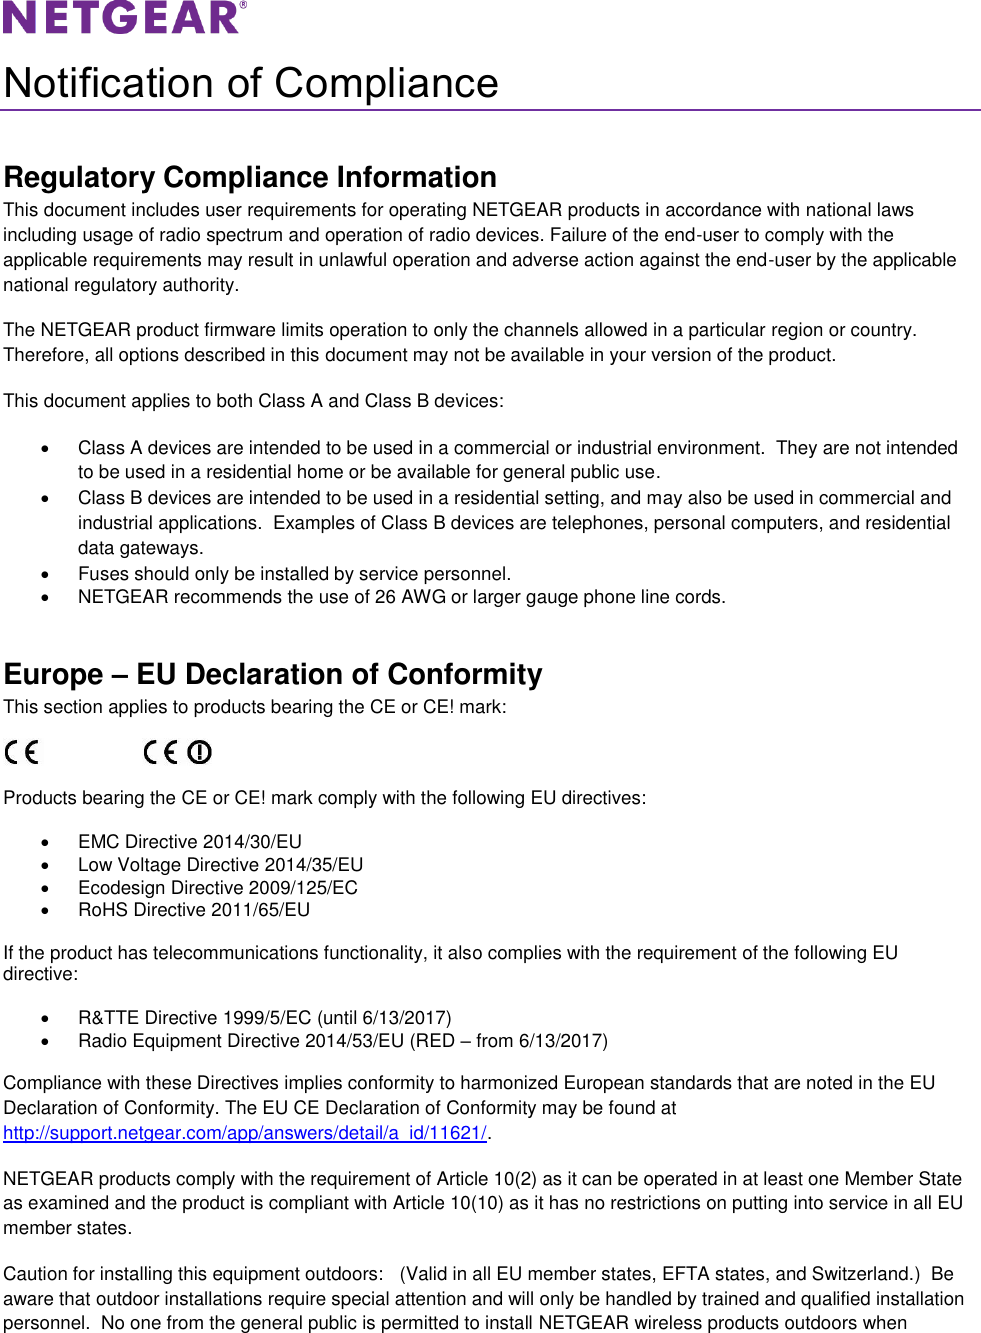 Page 1 of Netgear orporated 17200378 Mobile Router User Manual Notification of Compliance